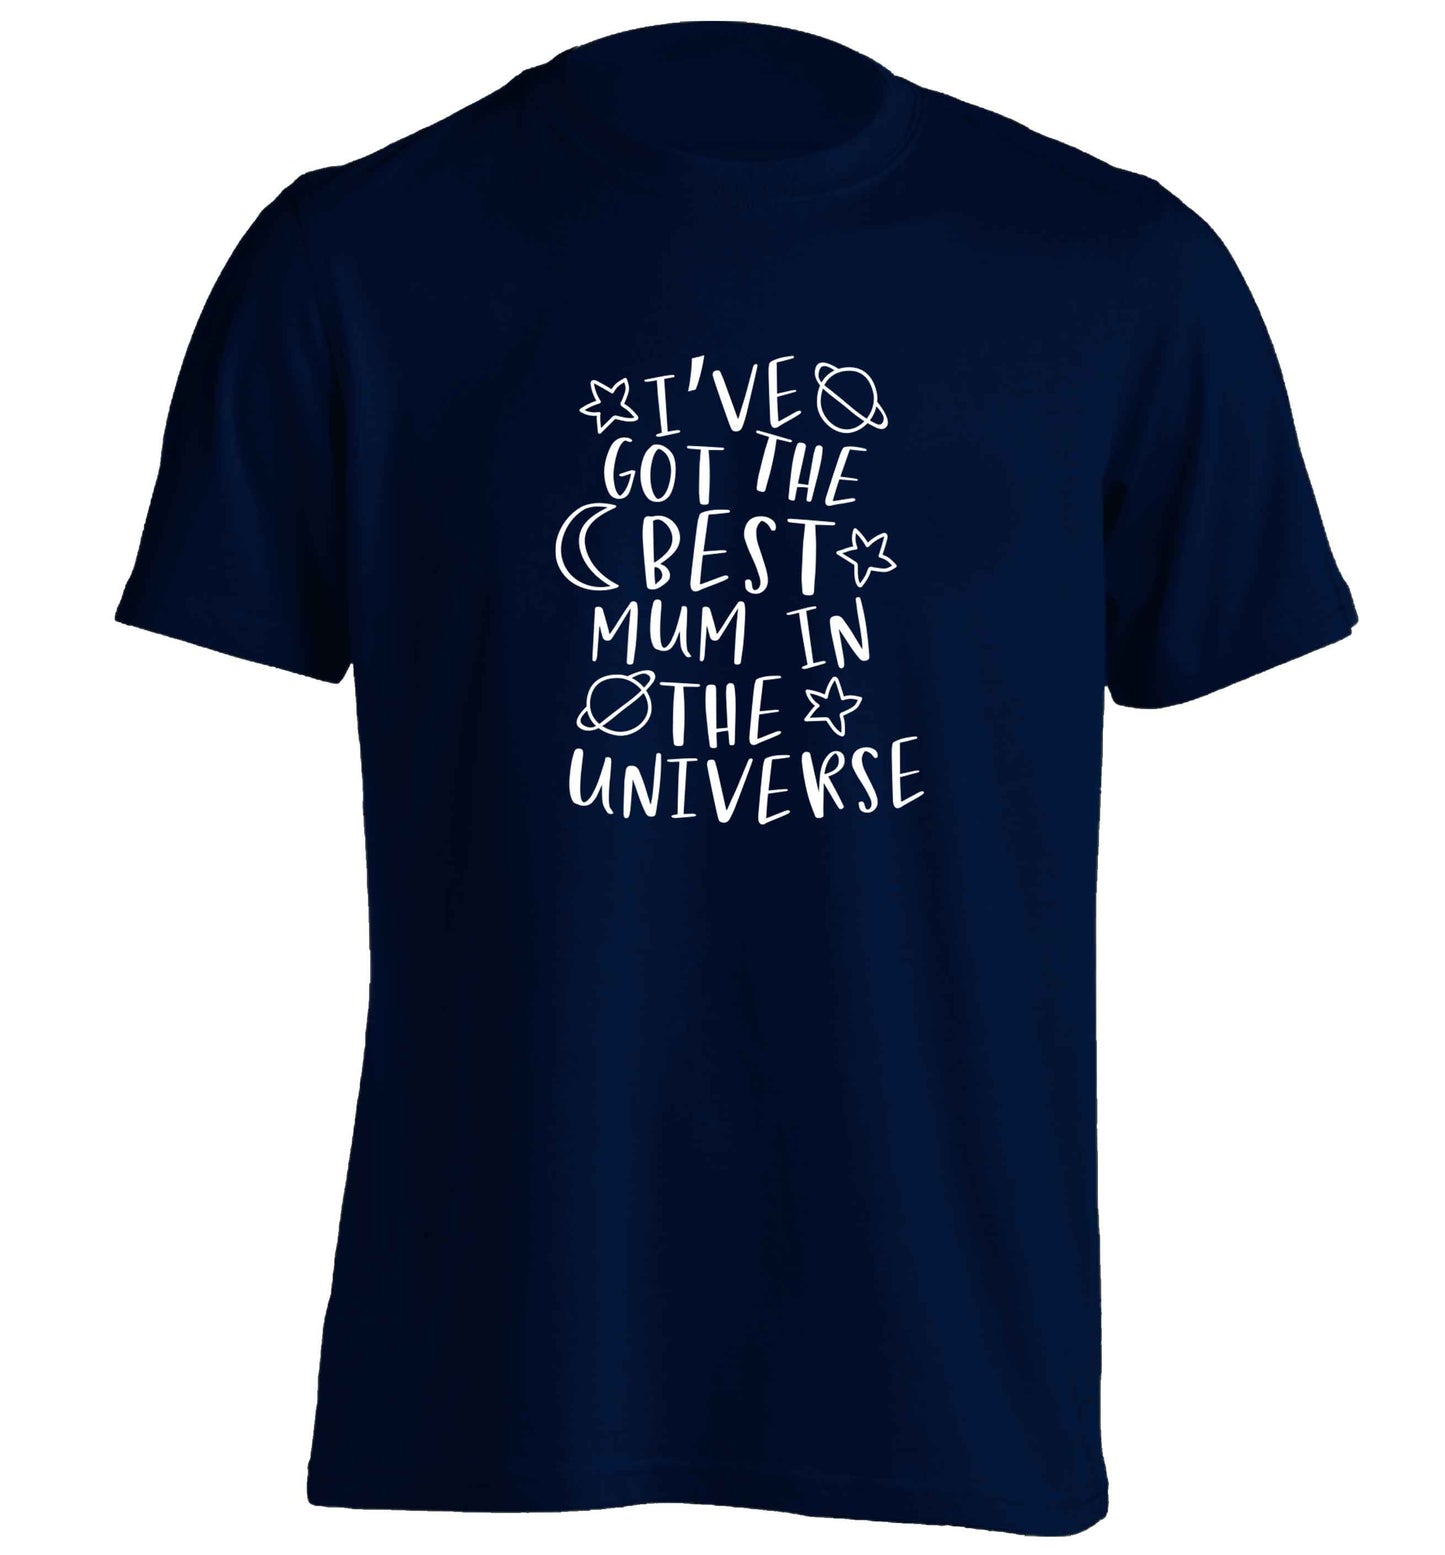 I have the best mummy in the whole wide world adults unisex navy Tshirt 2XL